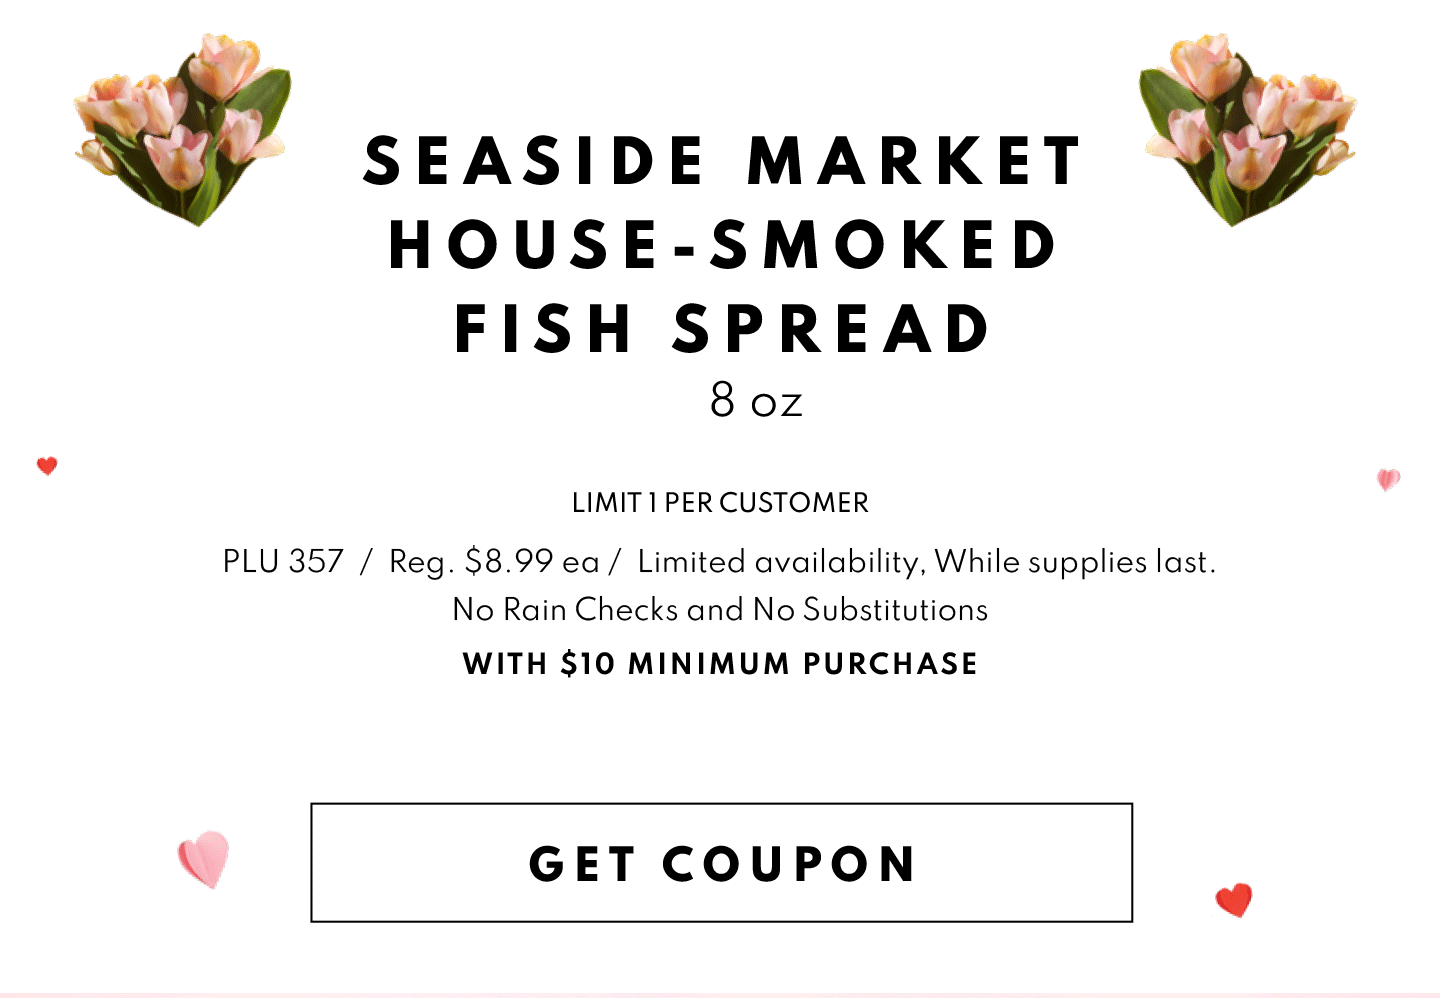 Get Coupon for a FREE Seaside Market House-Smoked Fish Spread, 8 oz. With $10 Minimum Purchase